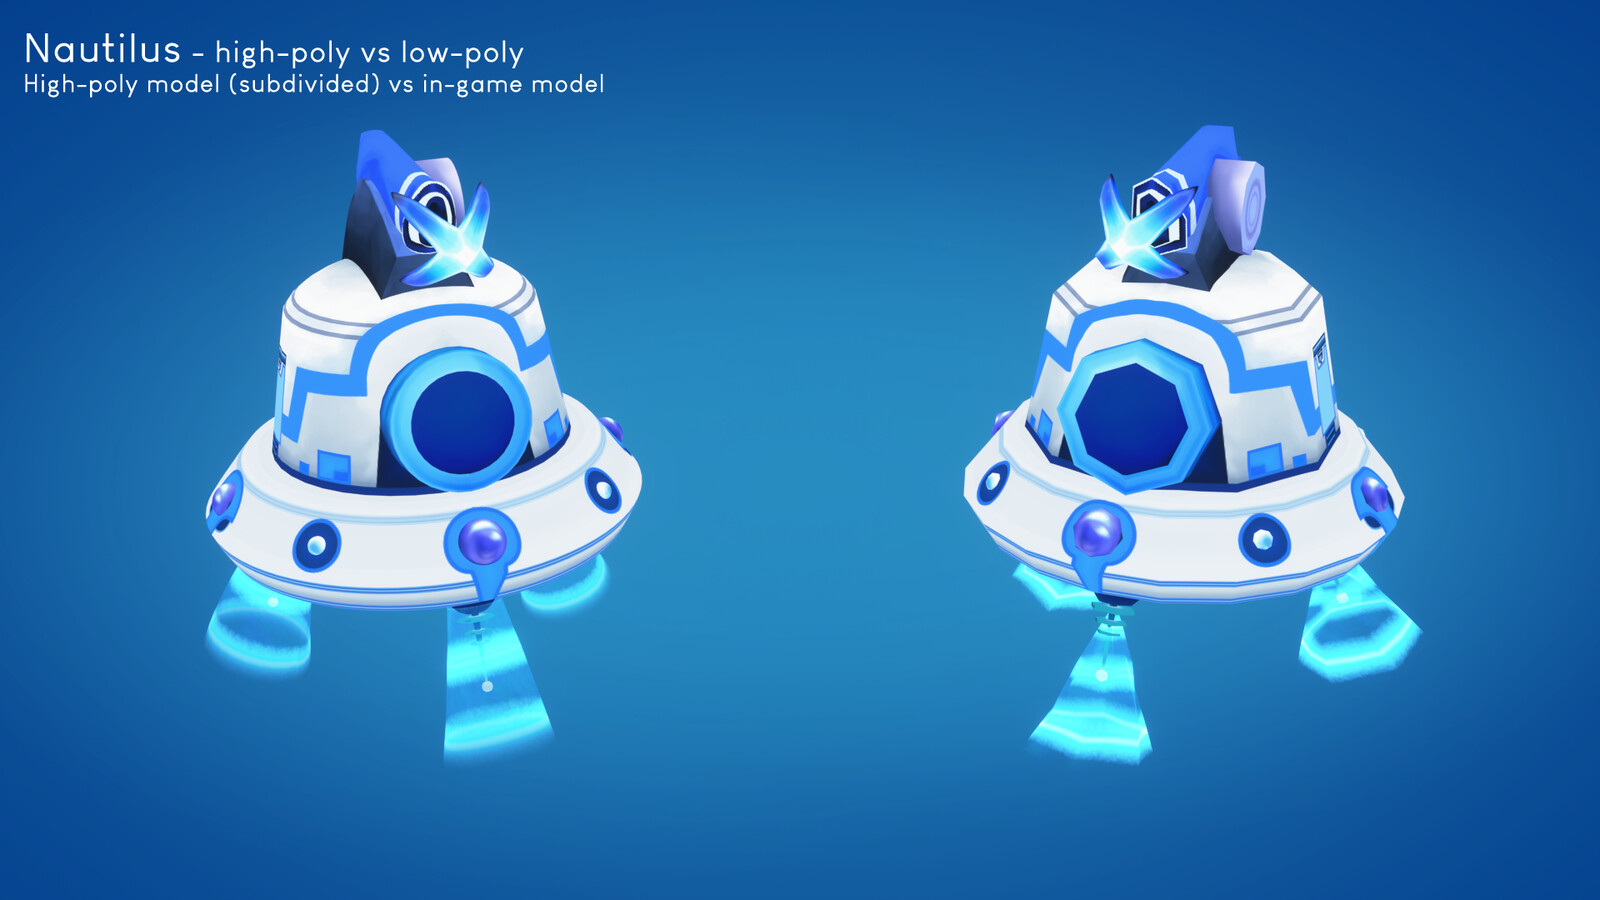 Comparison between the high-poly (subdivided) and low-poly (game-ready) versions.